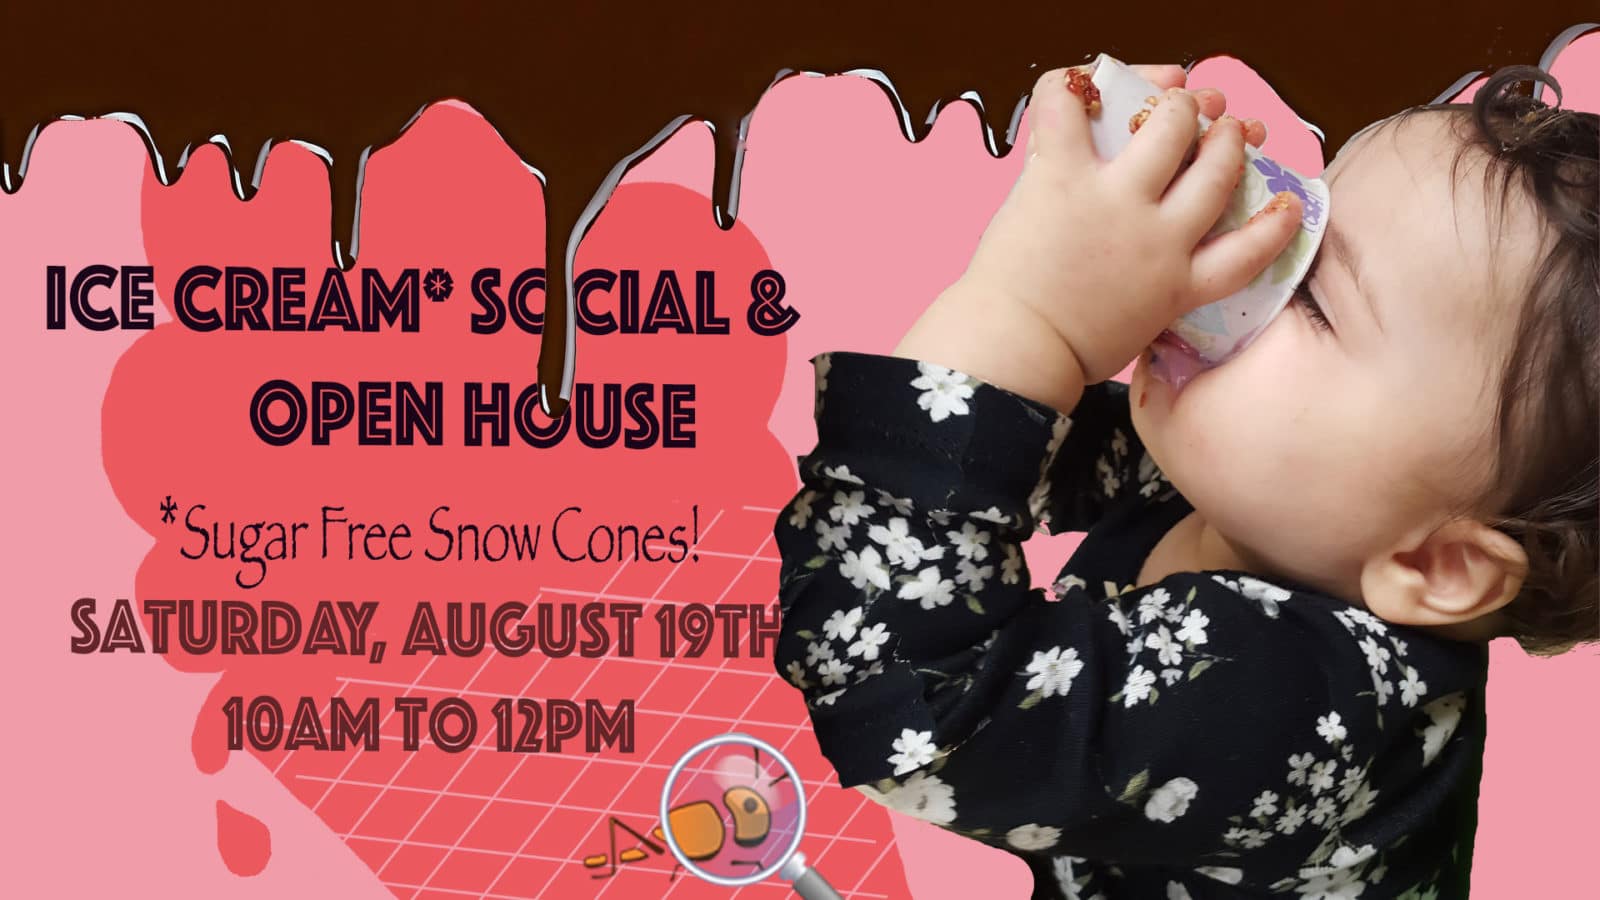 Ice Cream Social & Open House on August 19th